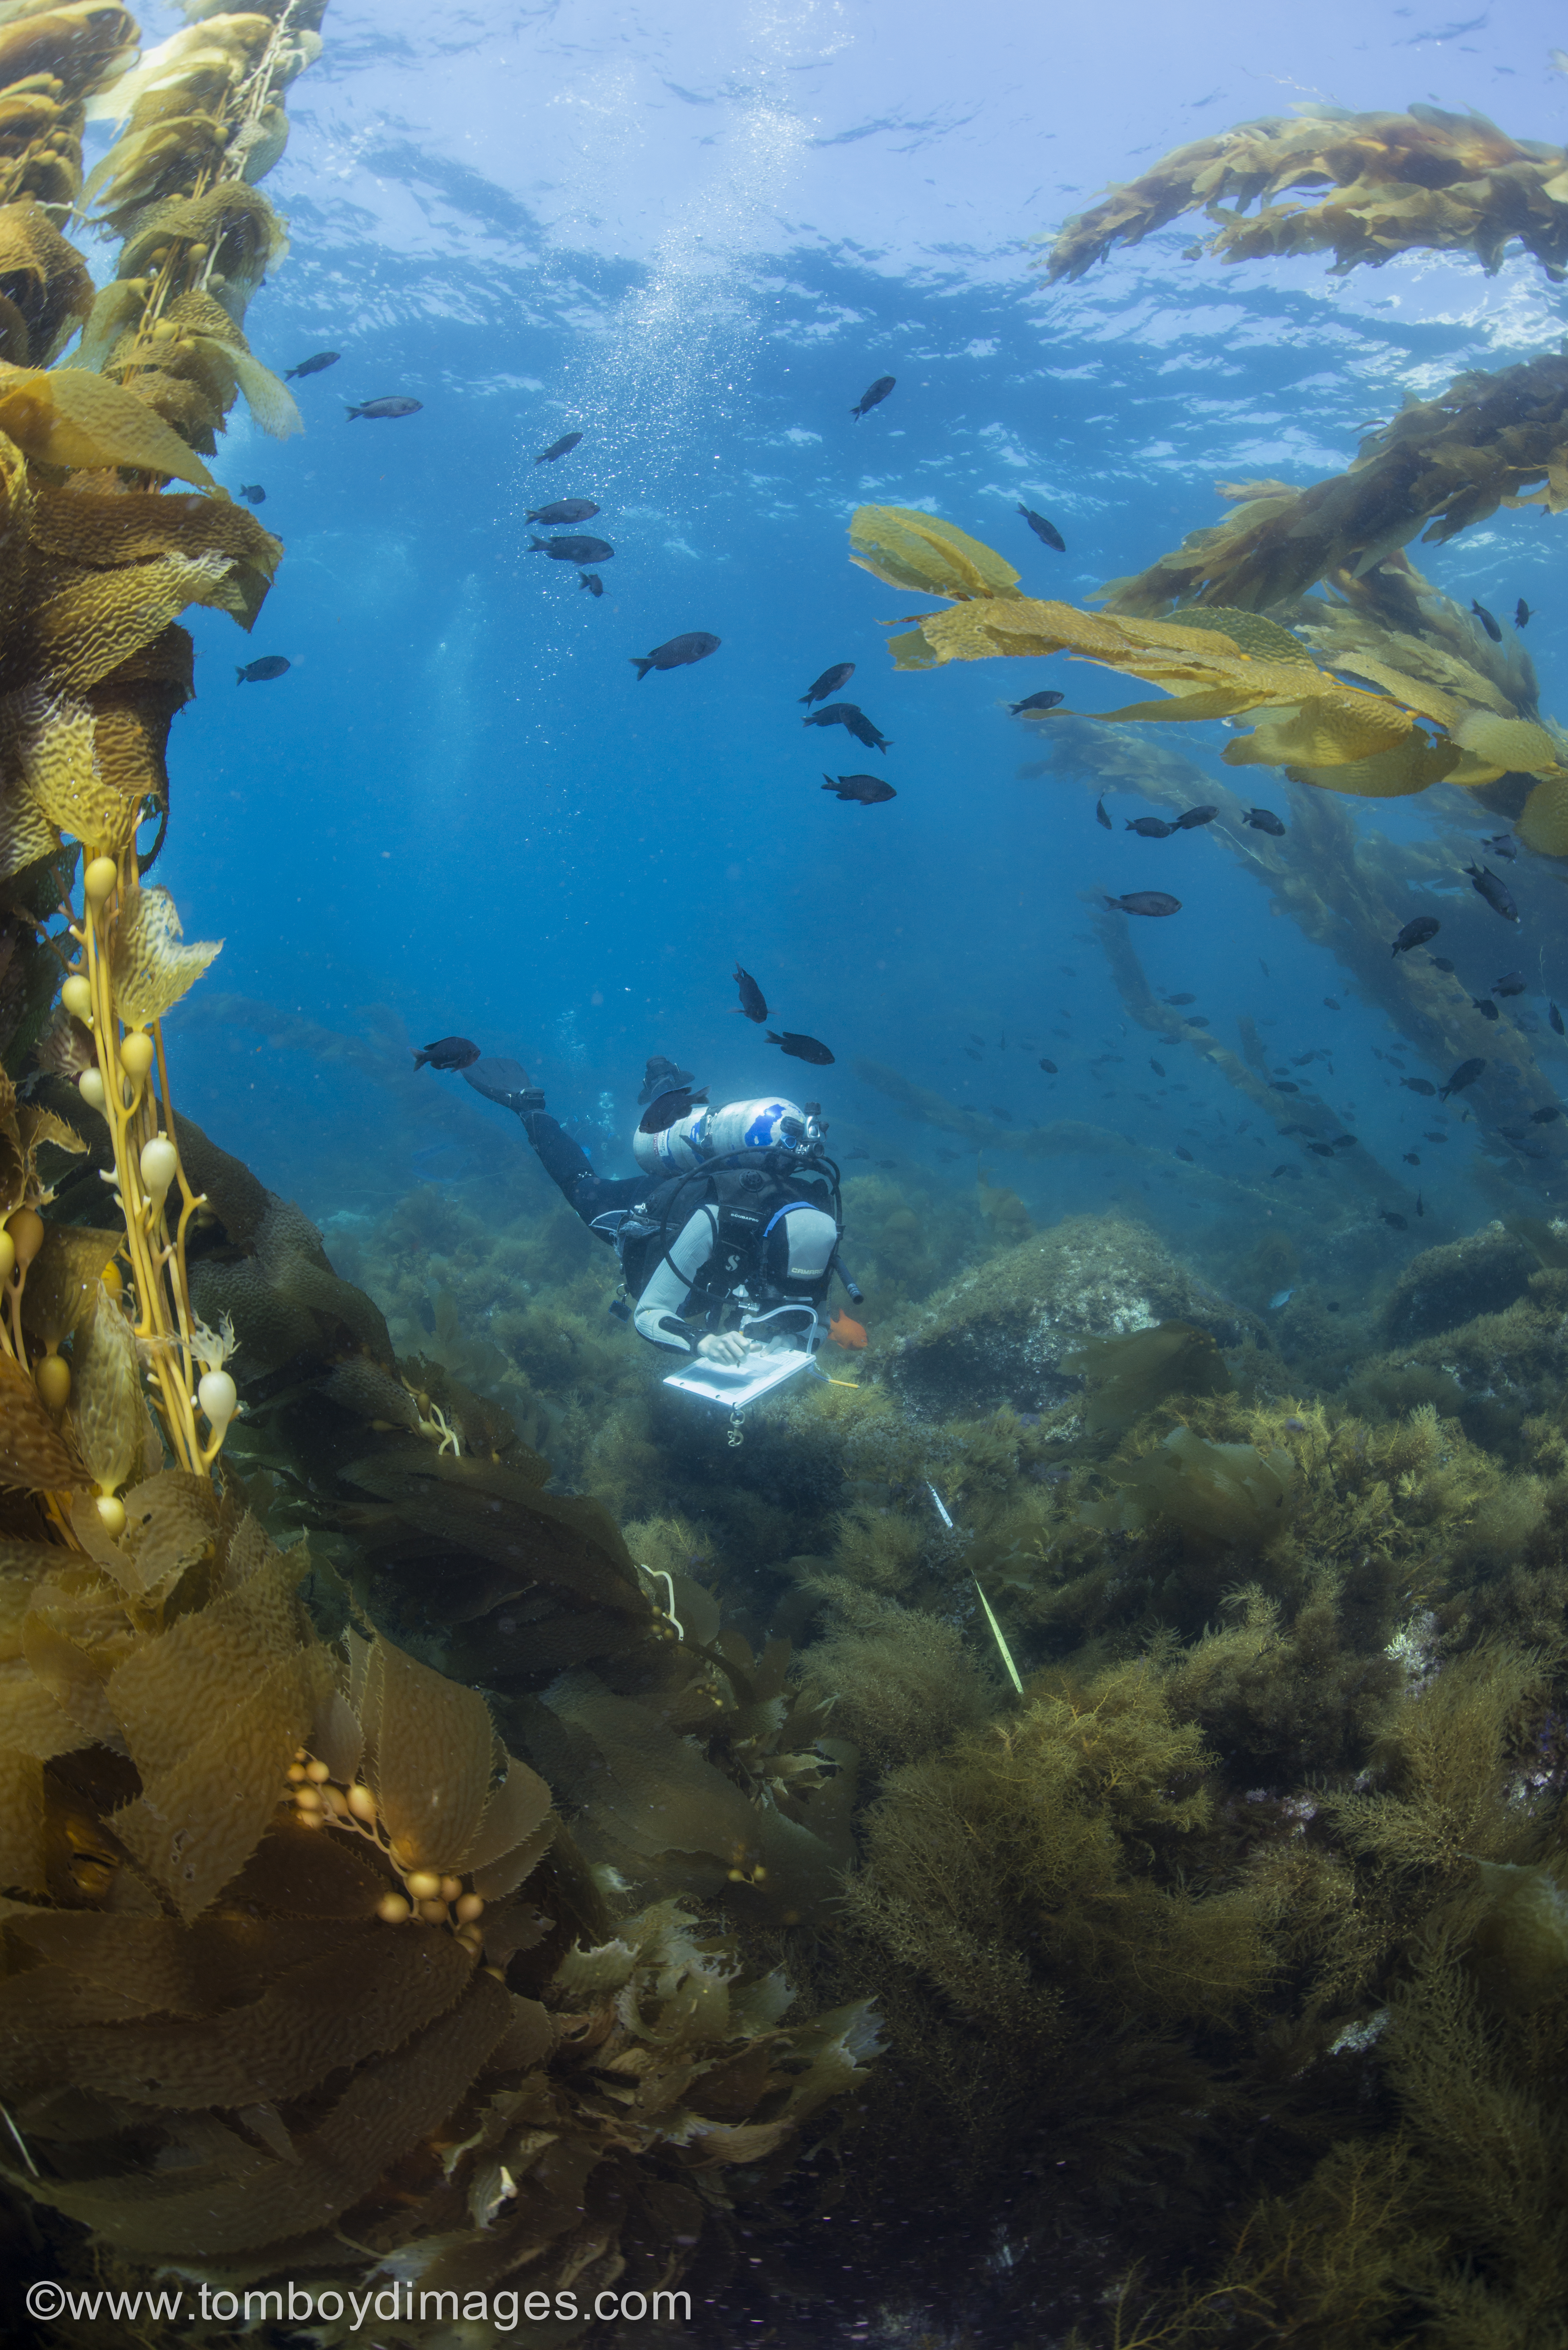 scuba diver collecting data surrounded by fish and kelp on a rocky reef